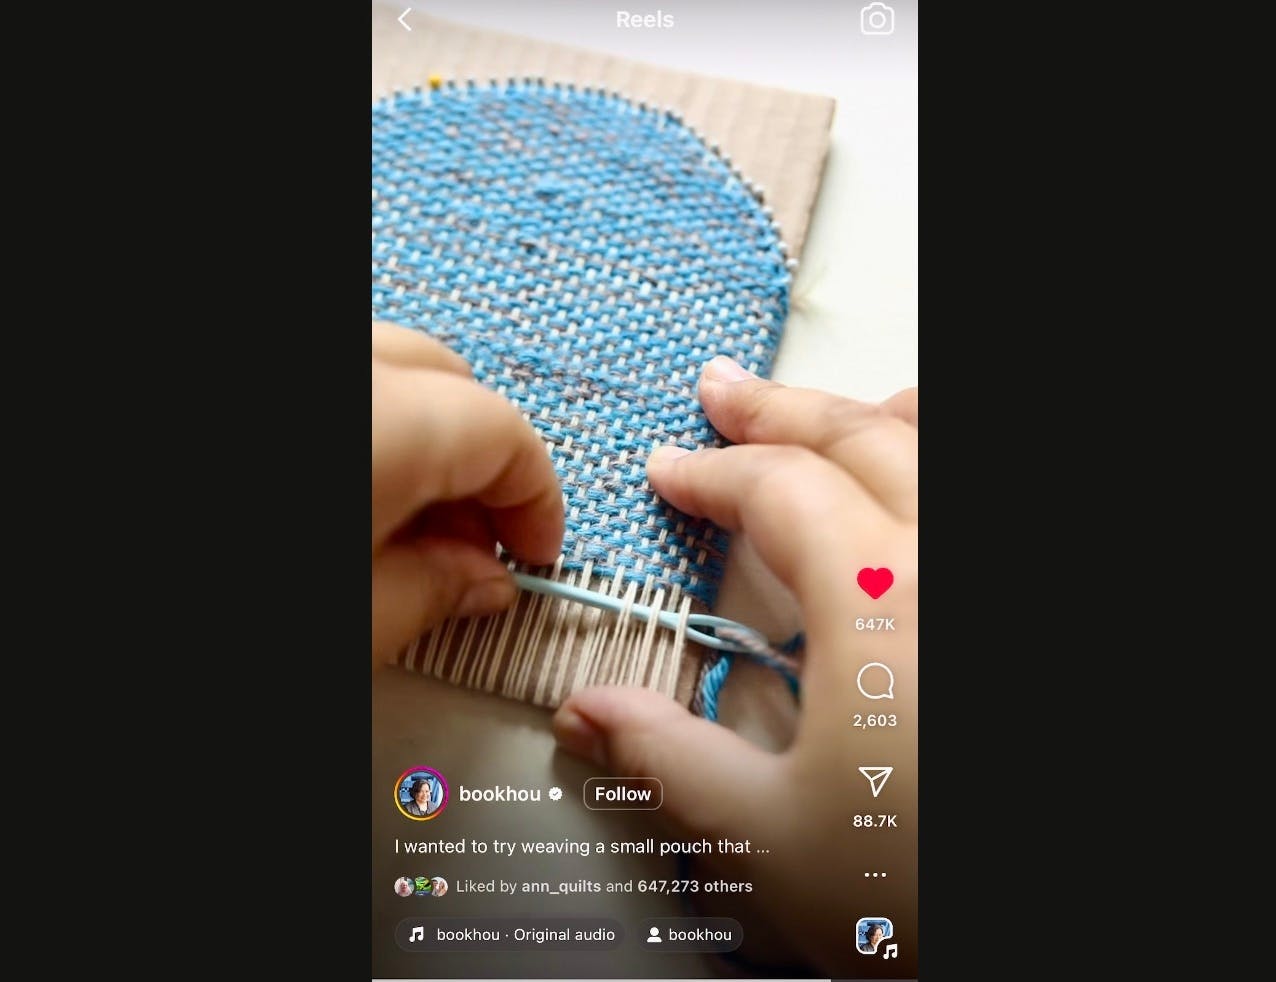 Screenshot of Instagram tutorial for tiny pouch weaving